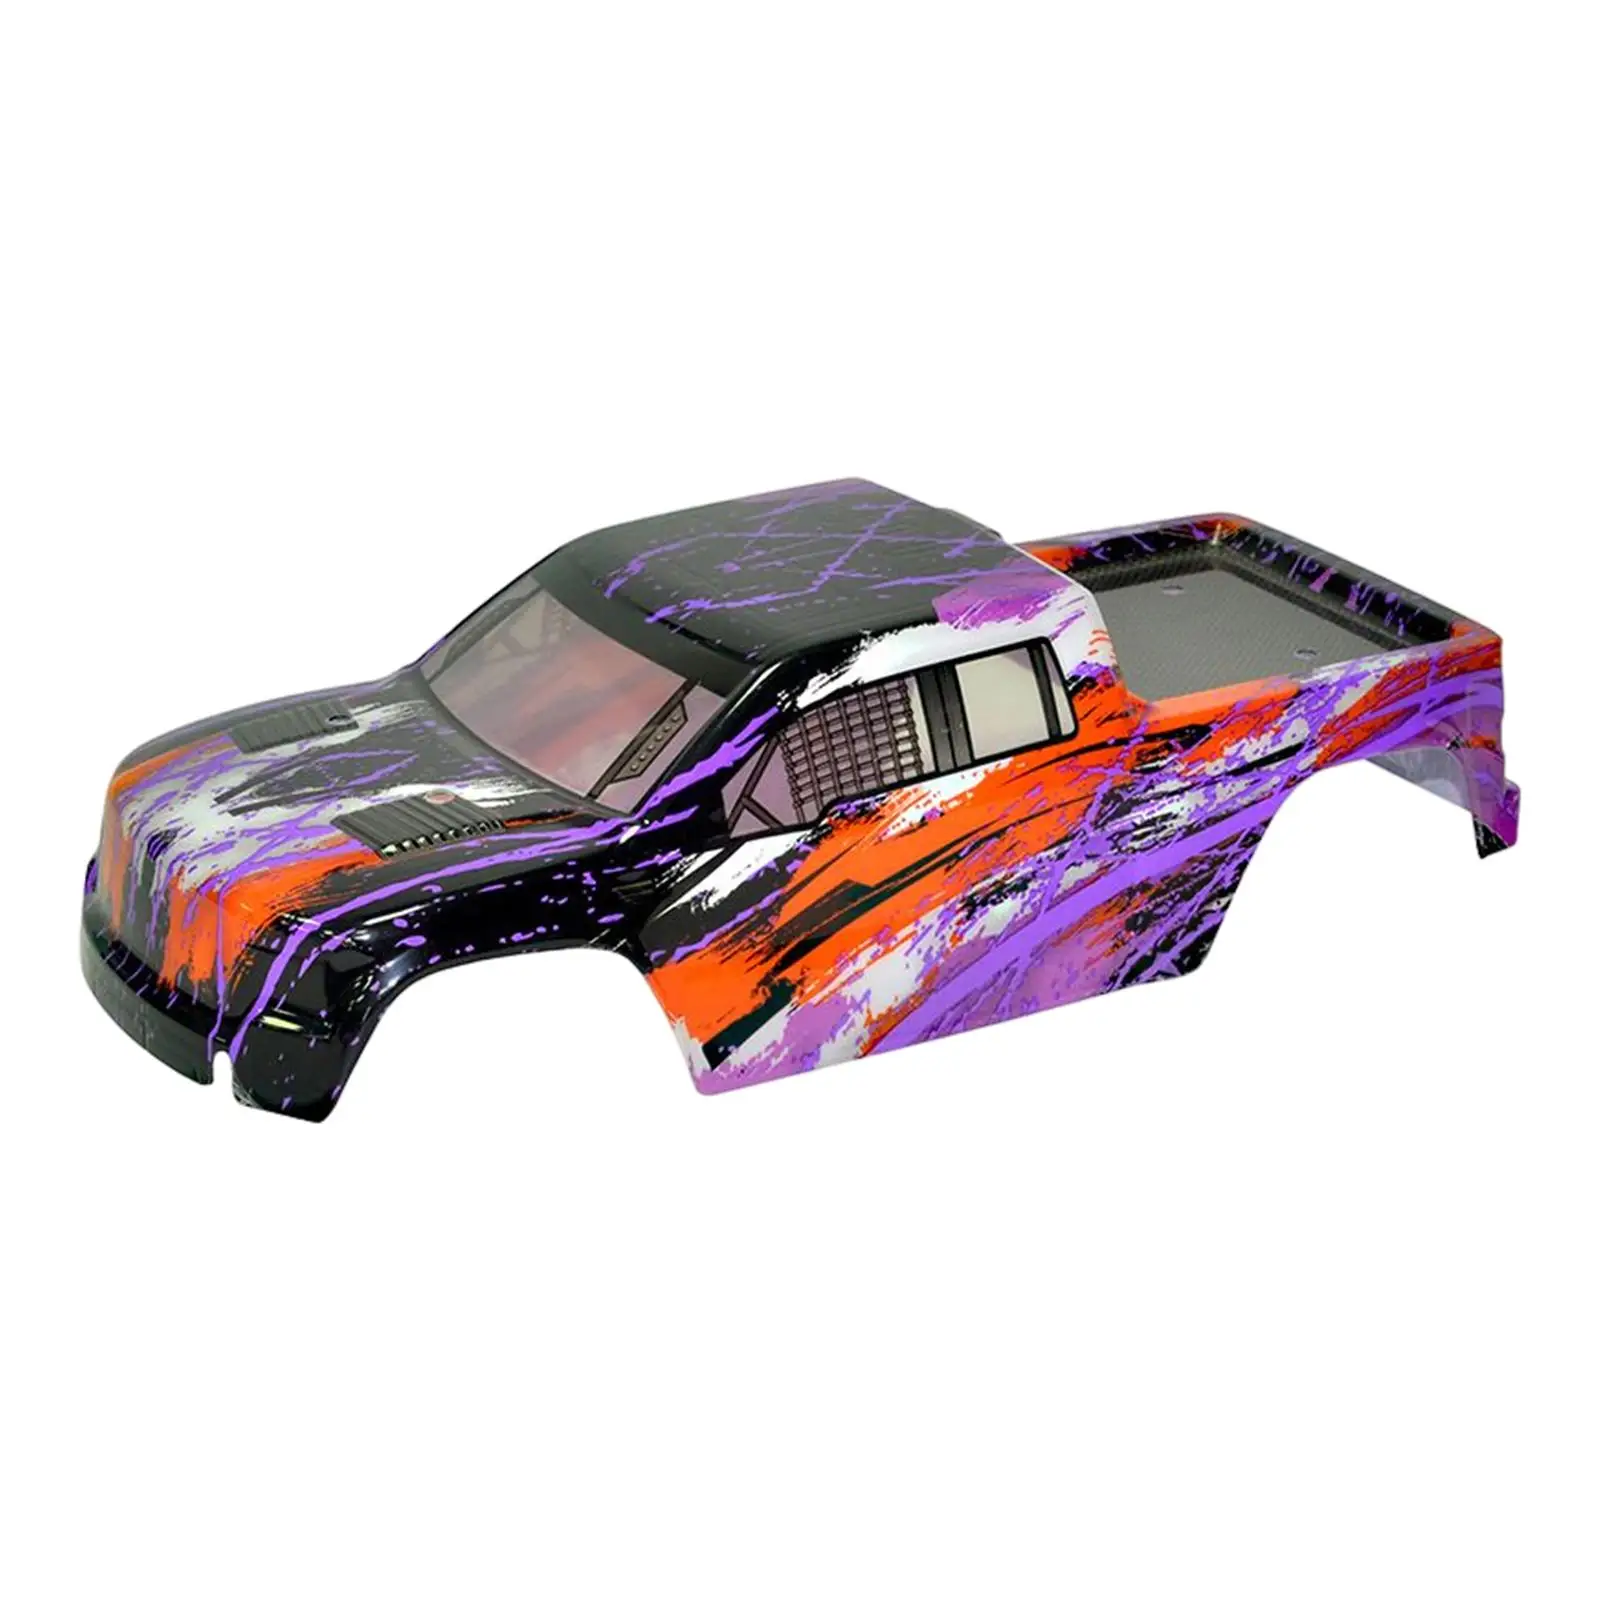 jifengmusical 90132 RC Body Shell Painted for 903 903A 1:12 Scale RC Crawler Car